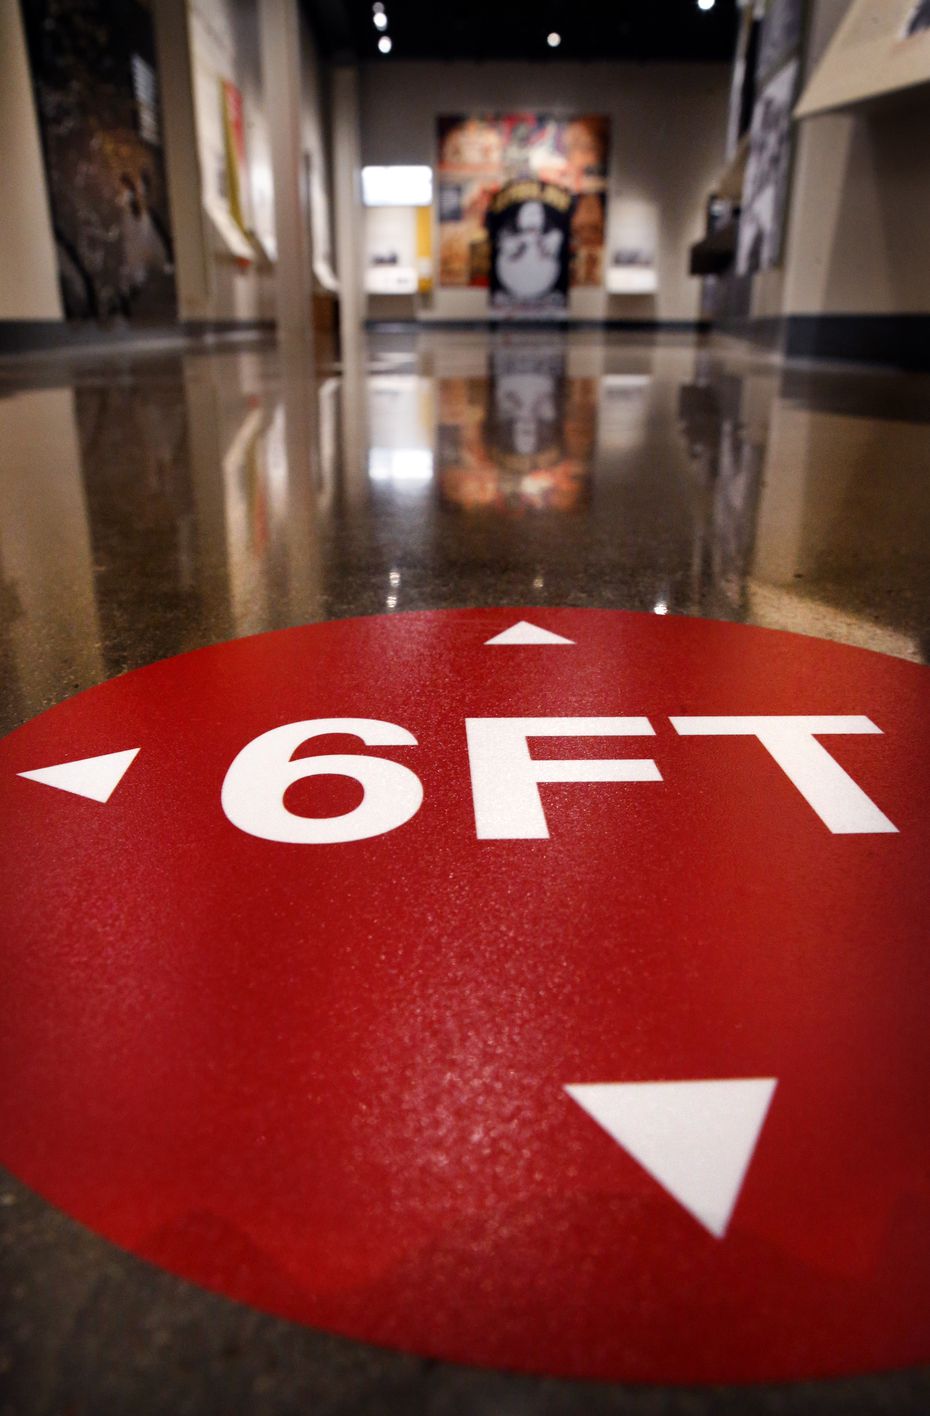 Markers on the floor will remind people to keep 6 ft. spacing while viewing exhibits in the...